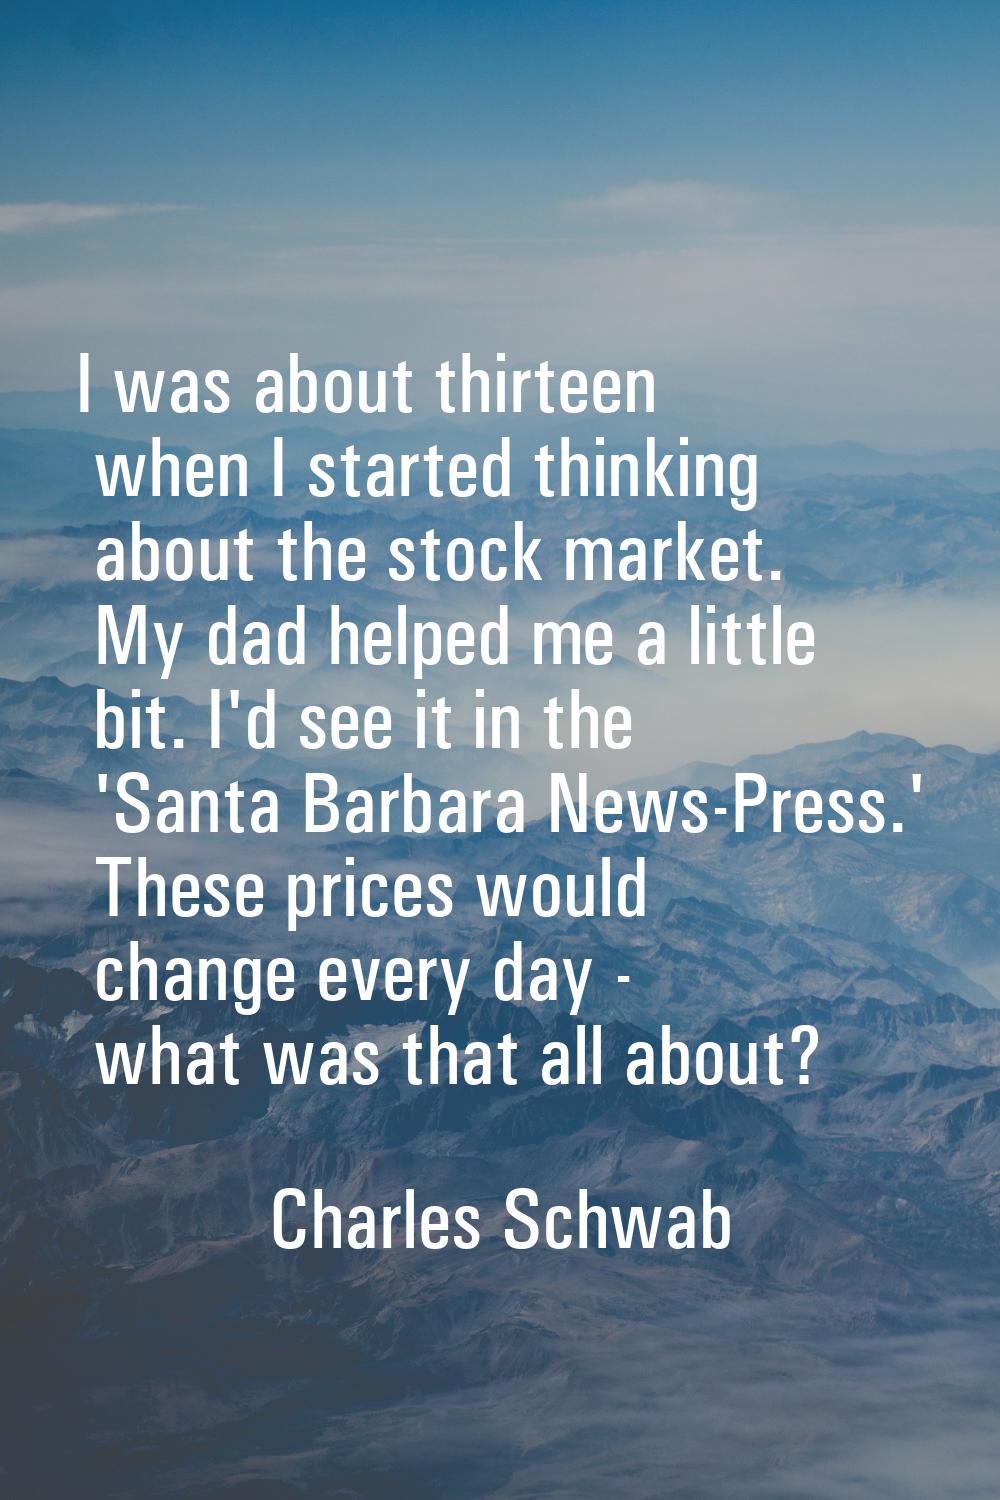 I was about thirteen when I started thinking about the stock market. My dad helped me a little bit.